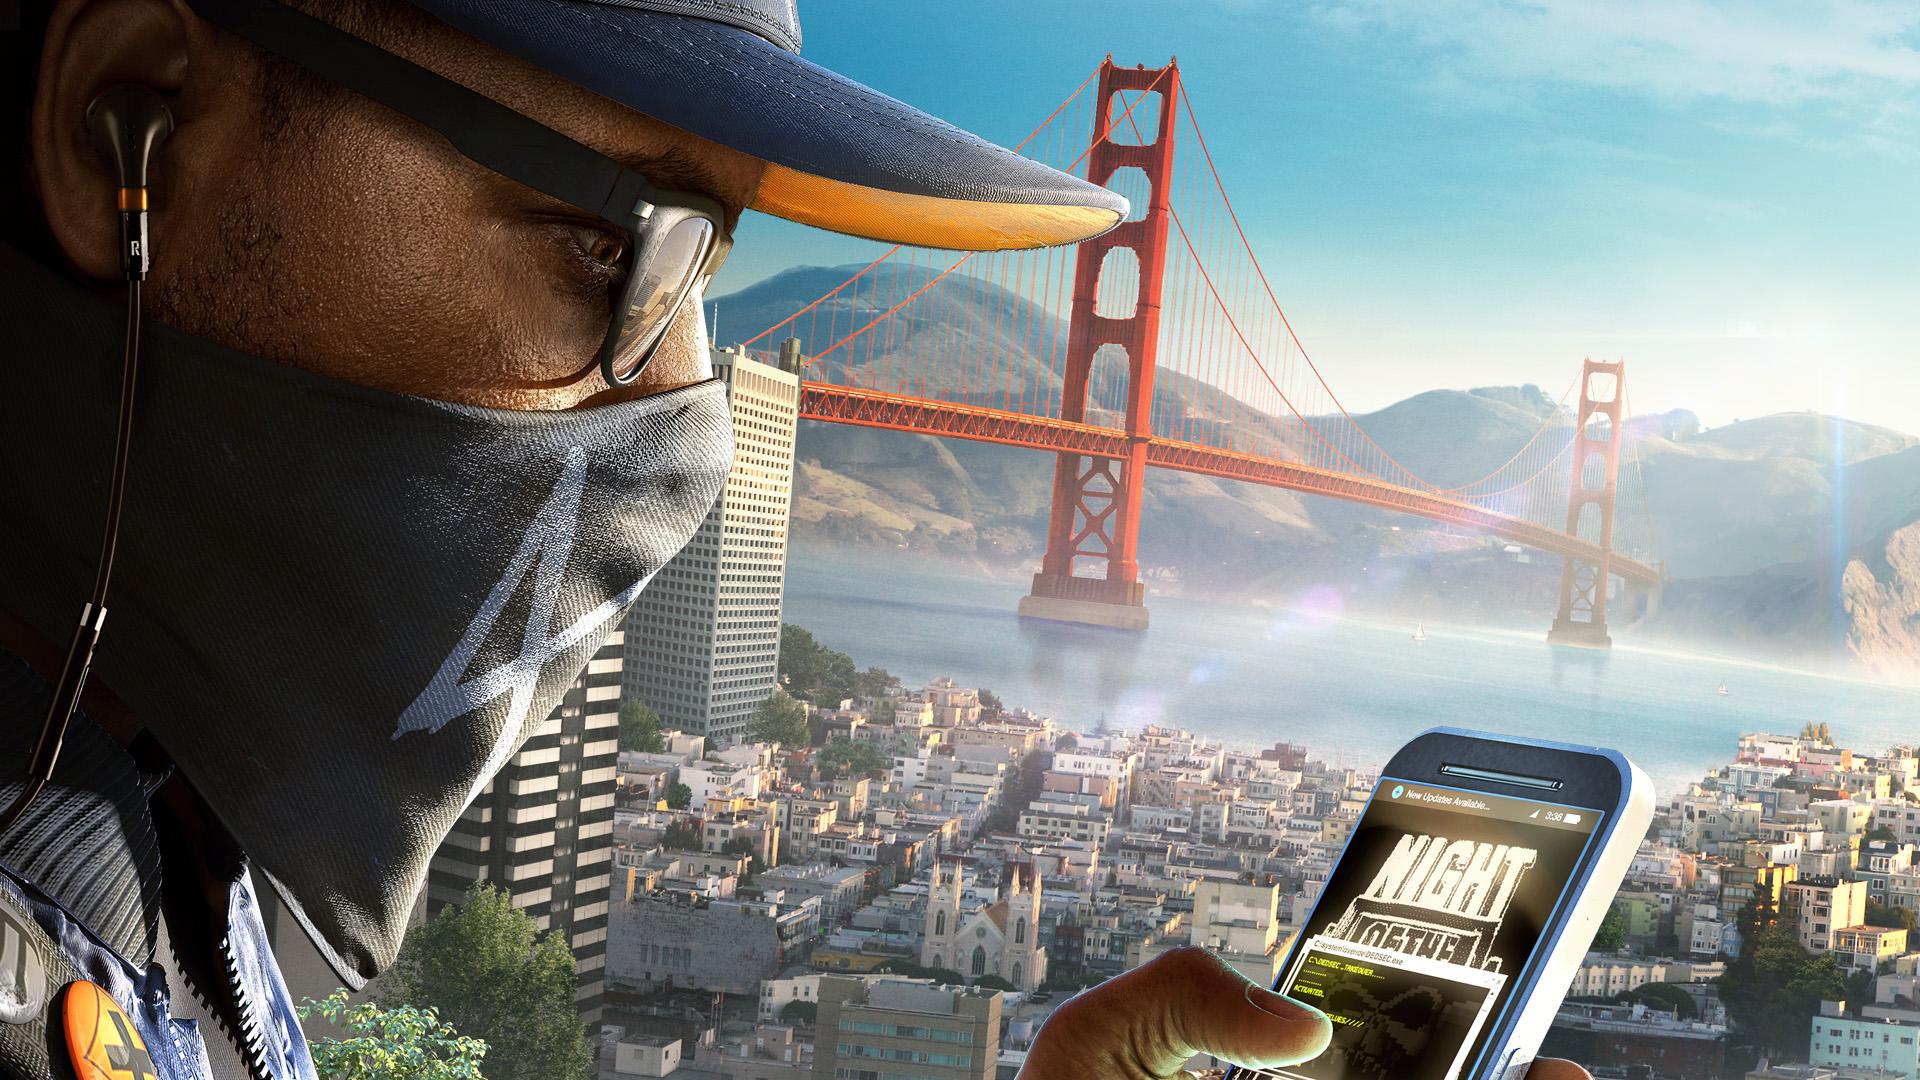 Ubisoft S Best Open World Isn T In Assassin S Creed Or Far Cry But In Watch Dogs 2 Vg247